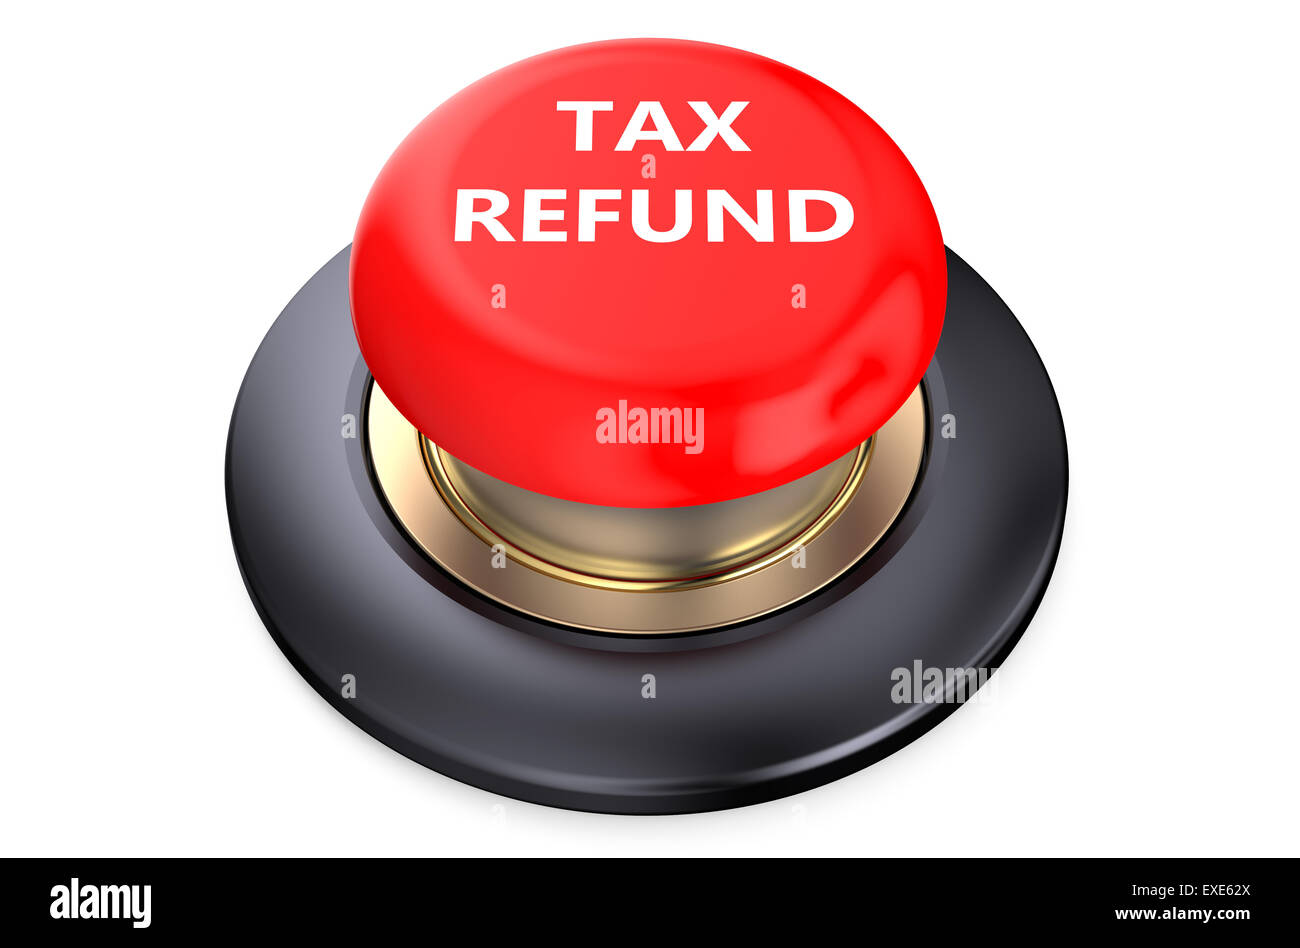 'tax refund' button isolated on white background Stock Photo